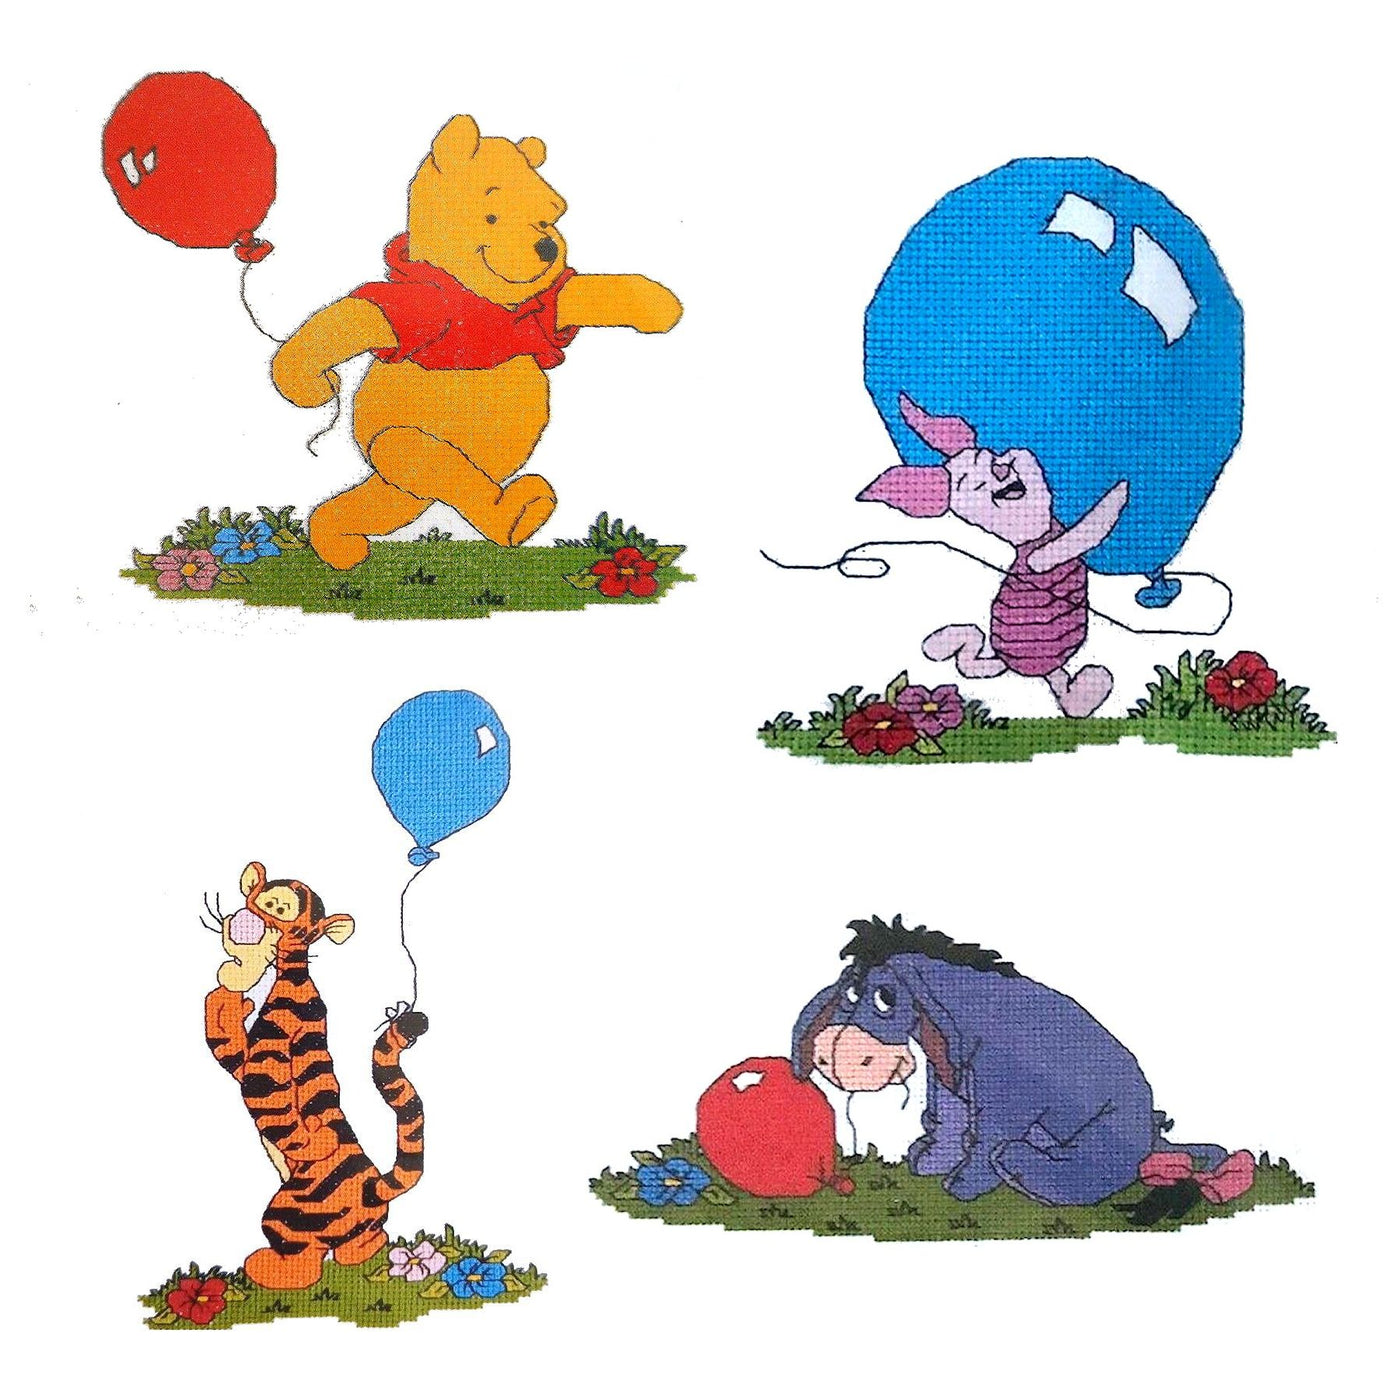 Disney Large Flat Stickers Pooh W/Characters